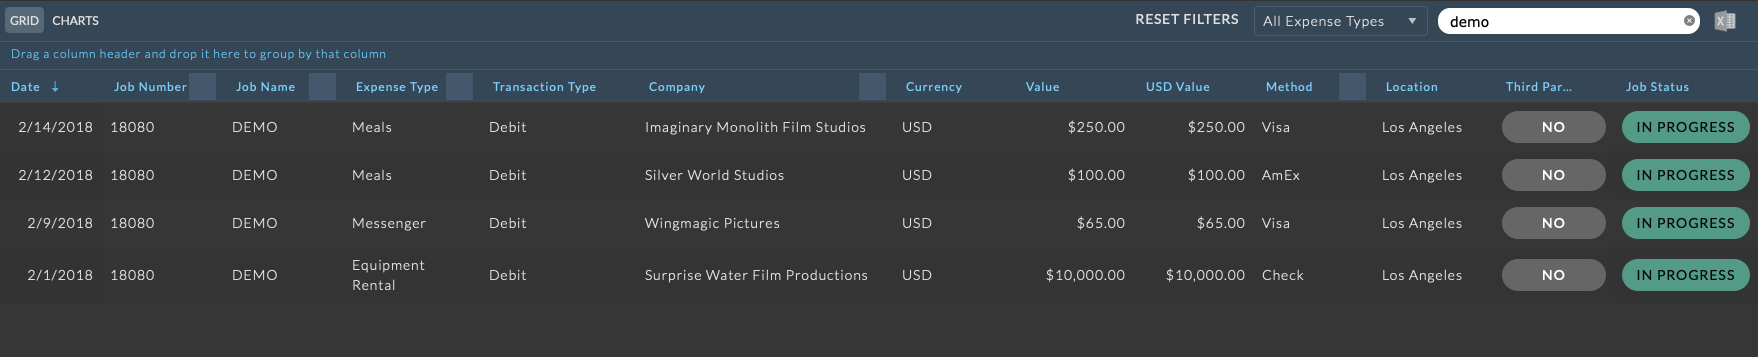 _images/nim5_invoices_studio_expense_search_filter.png